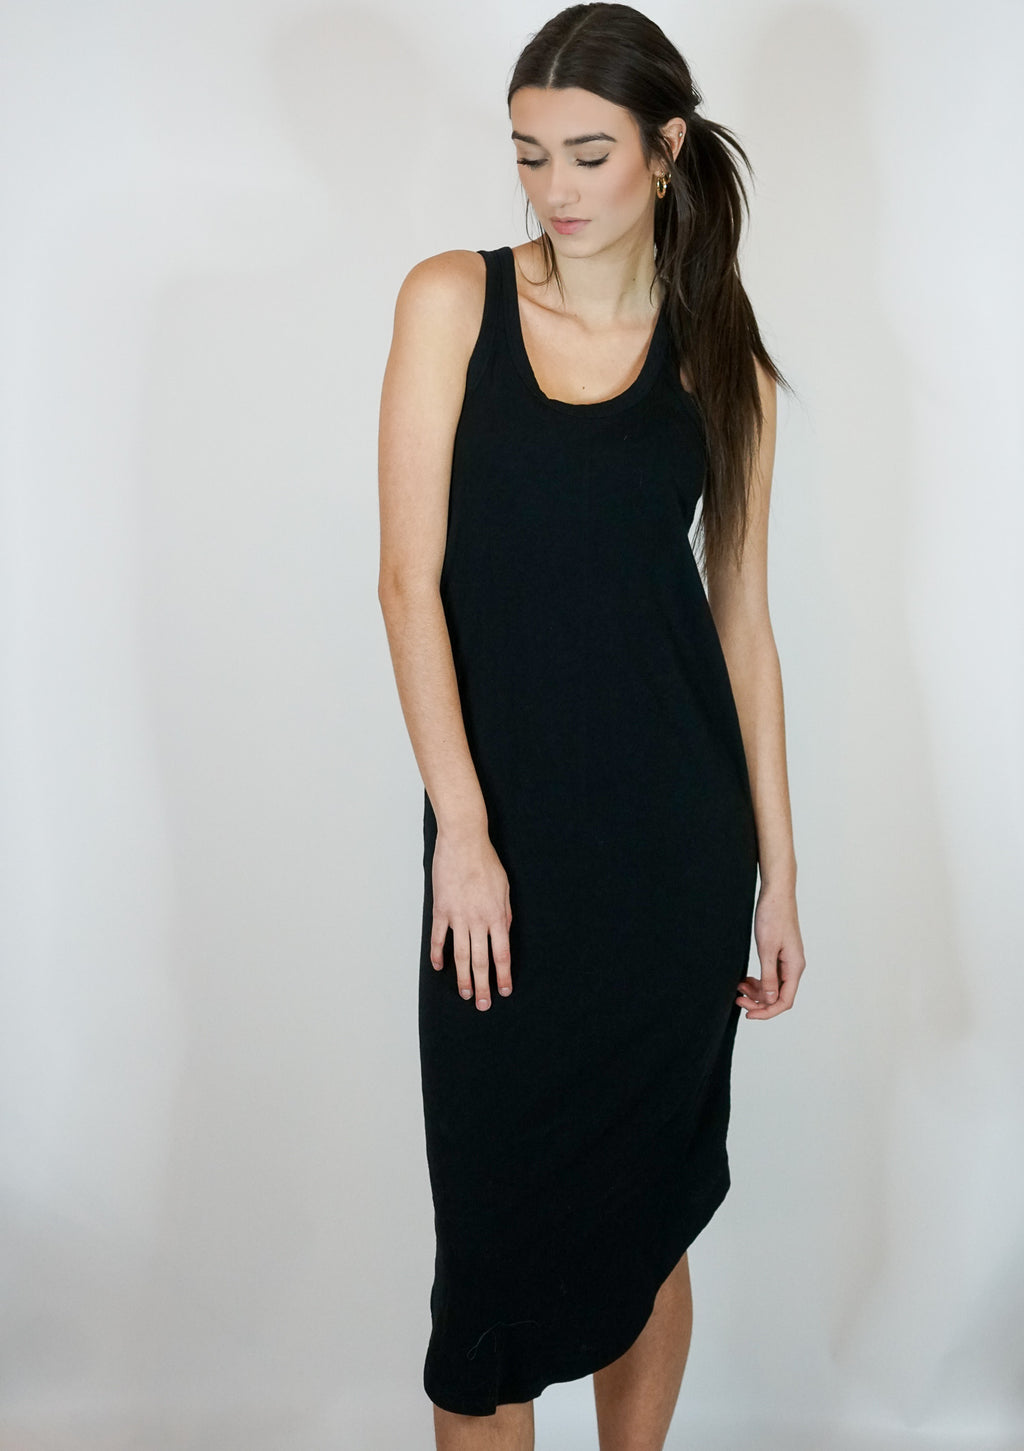 Easy-going Dress- Z Supply - Uforia Muse 